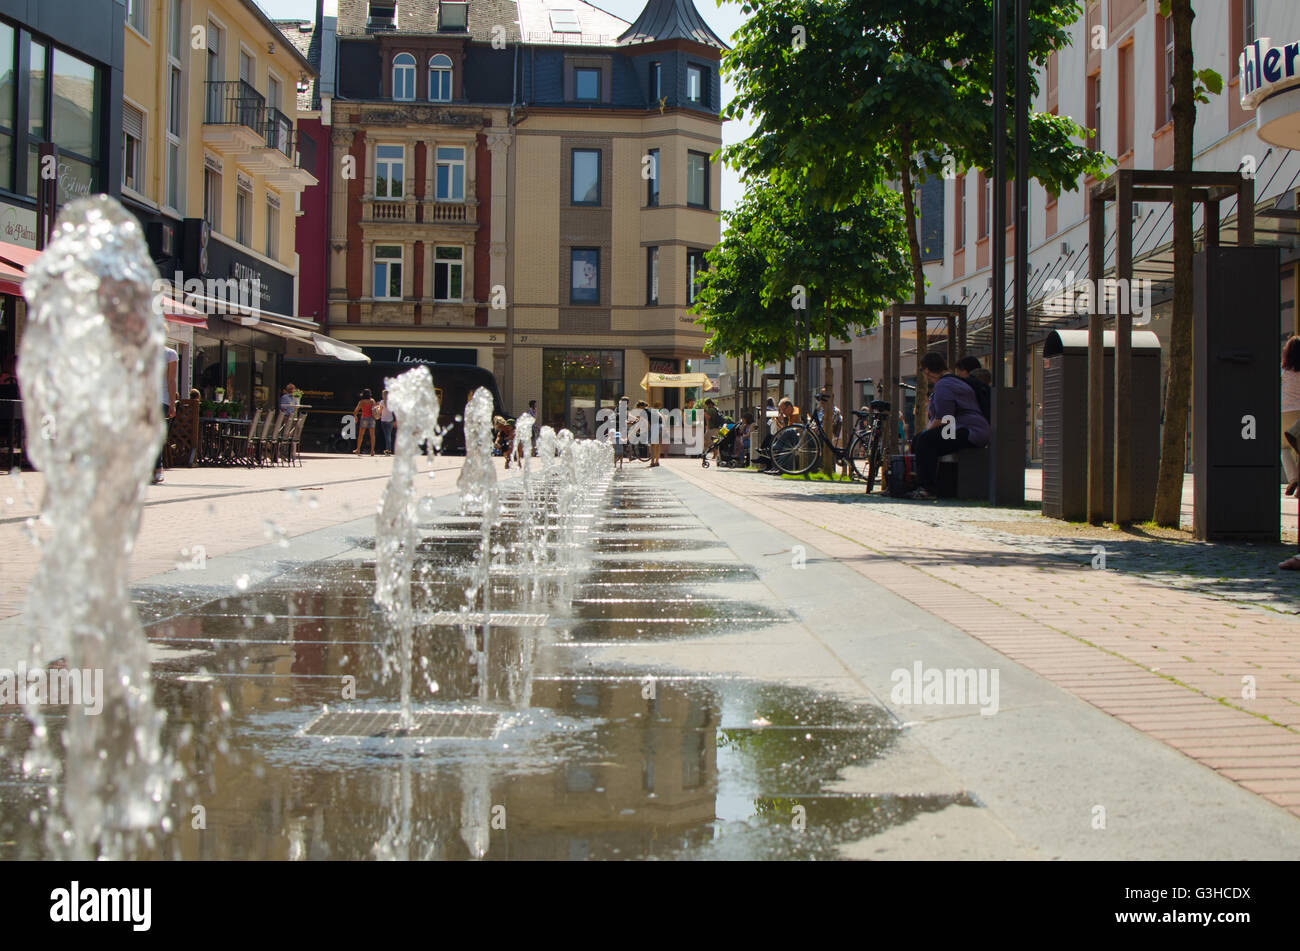 Water fountains in the pedestrian shopping zone in Gießen, Germany Stock Photo